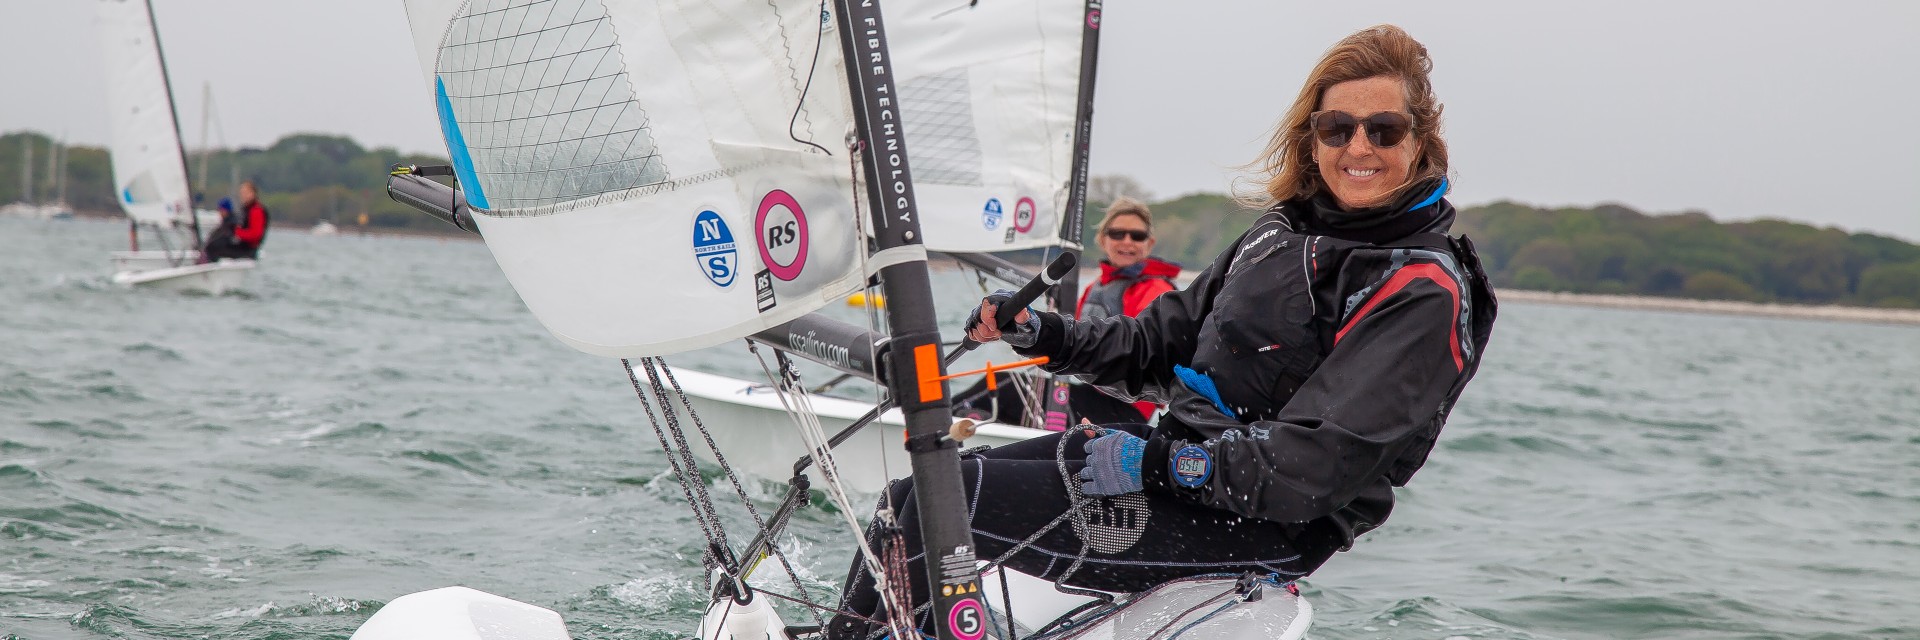 Women on the water sailing session